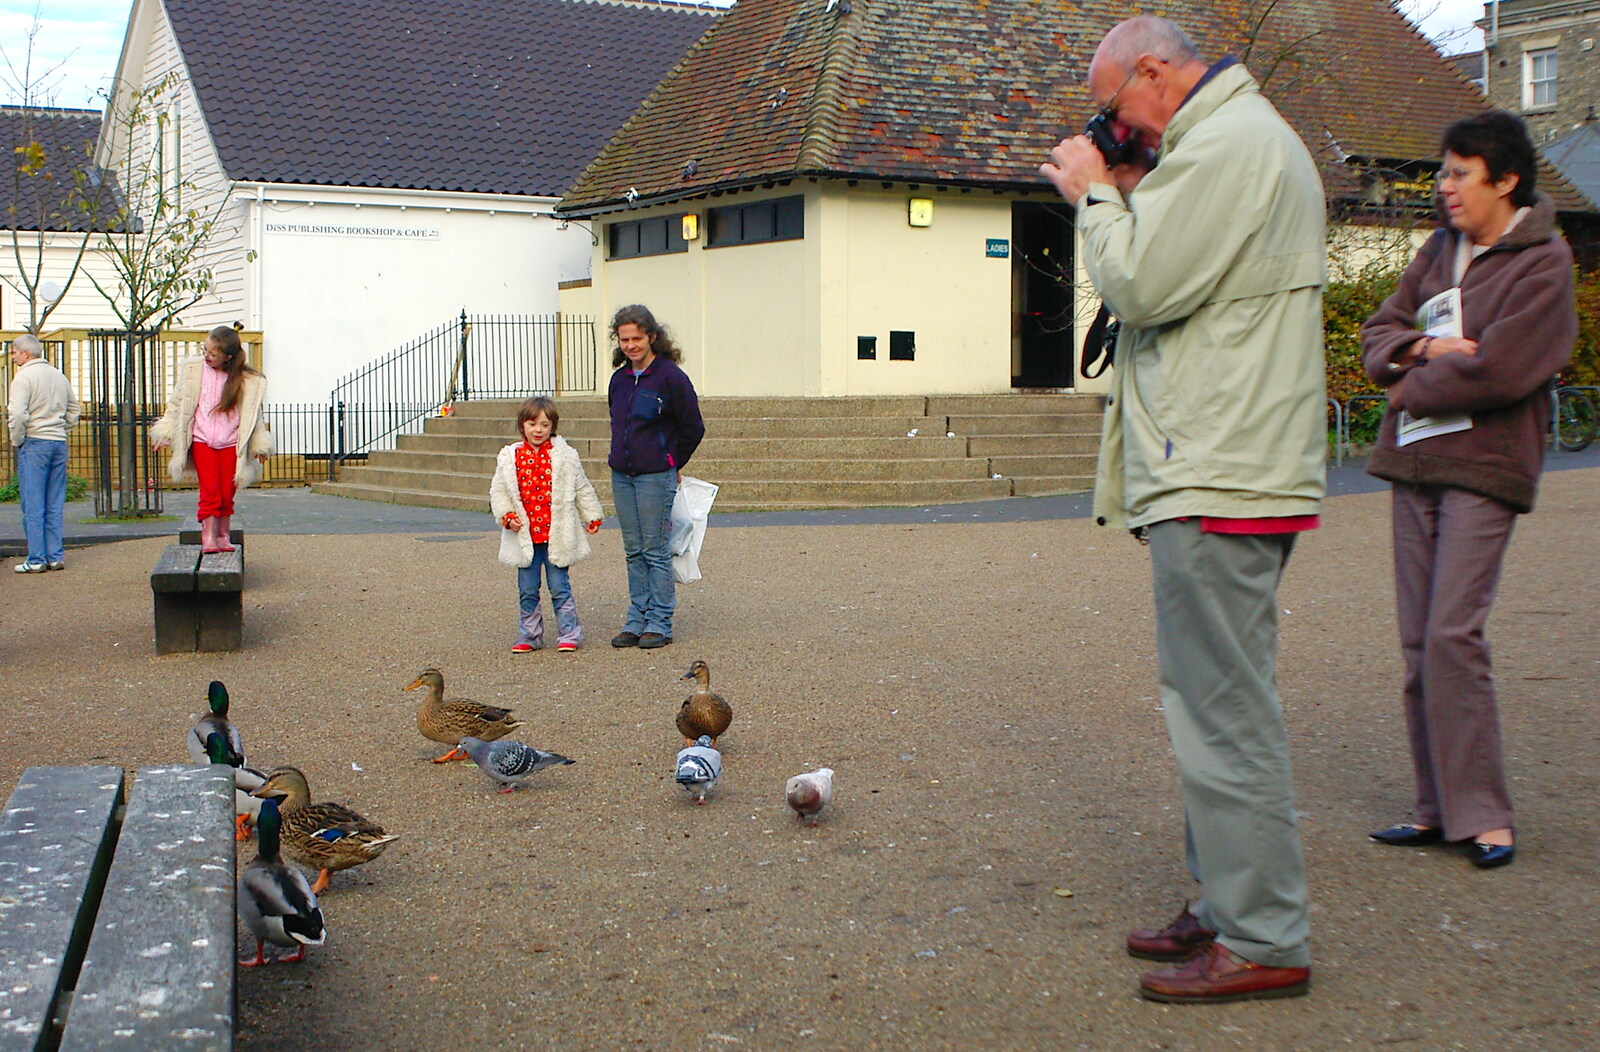 Photographing the ducks from Burnt-out Recycling Bins and Fireworks from a Distance, Diss, Norfolk - 4th November 2005